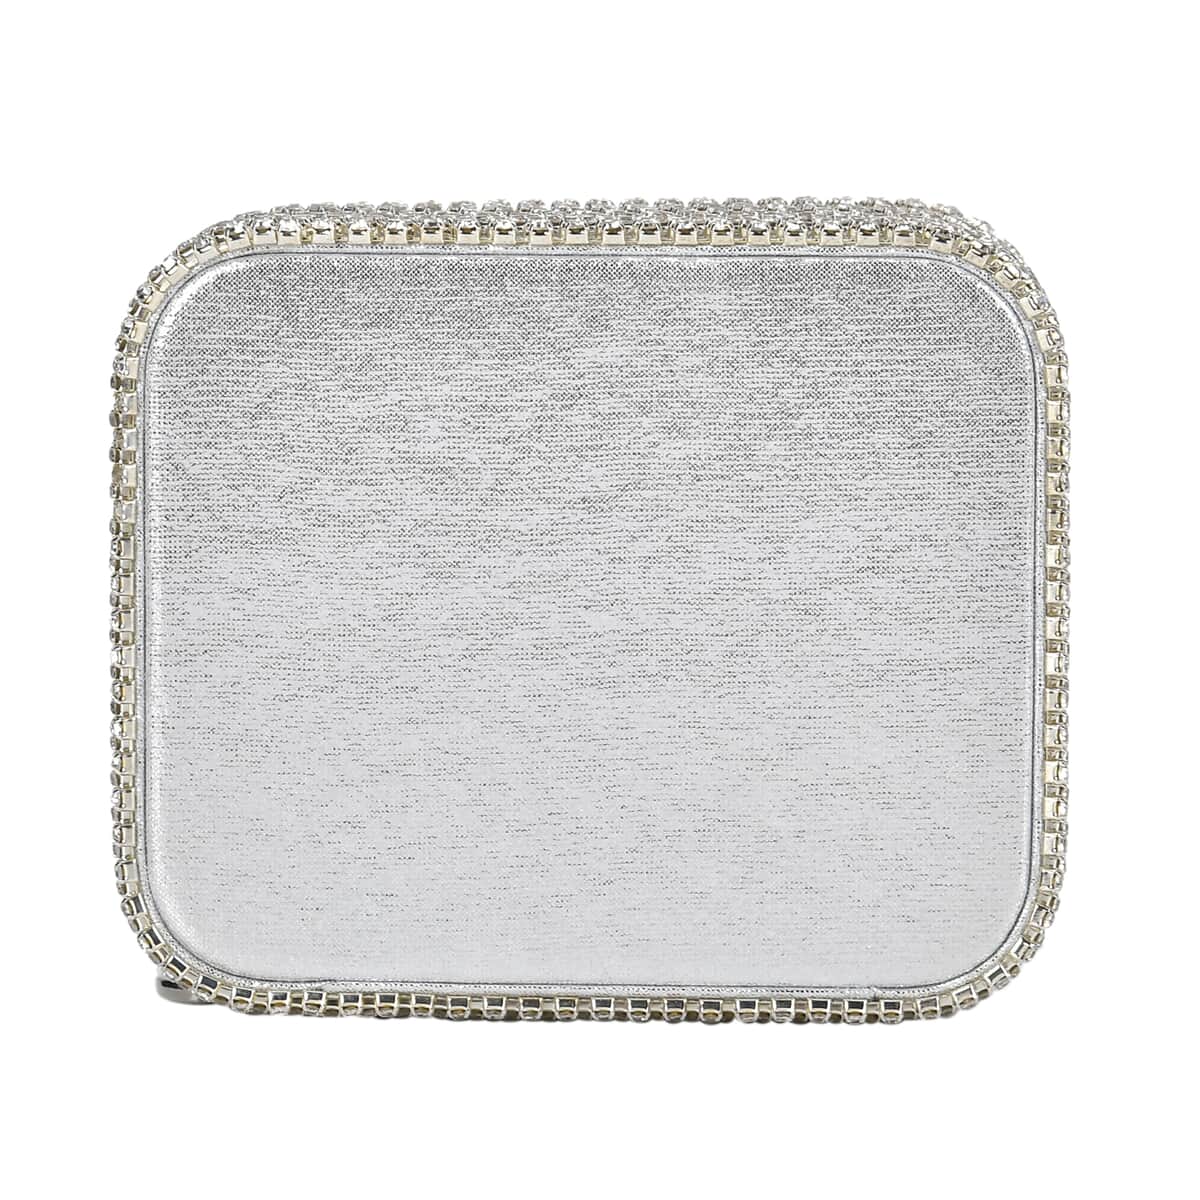 Silver Color Sparkling Crystal and Velvet Jewelry Box (4.72"x3.94"x2.56") image number 3